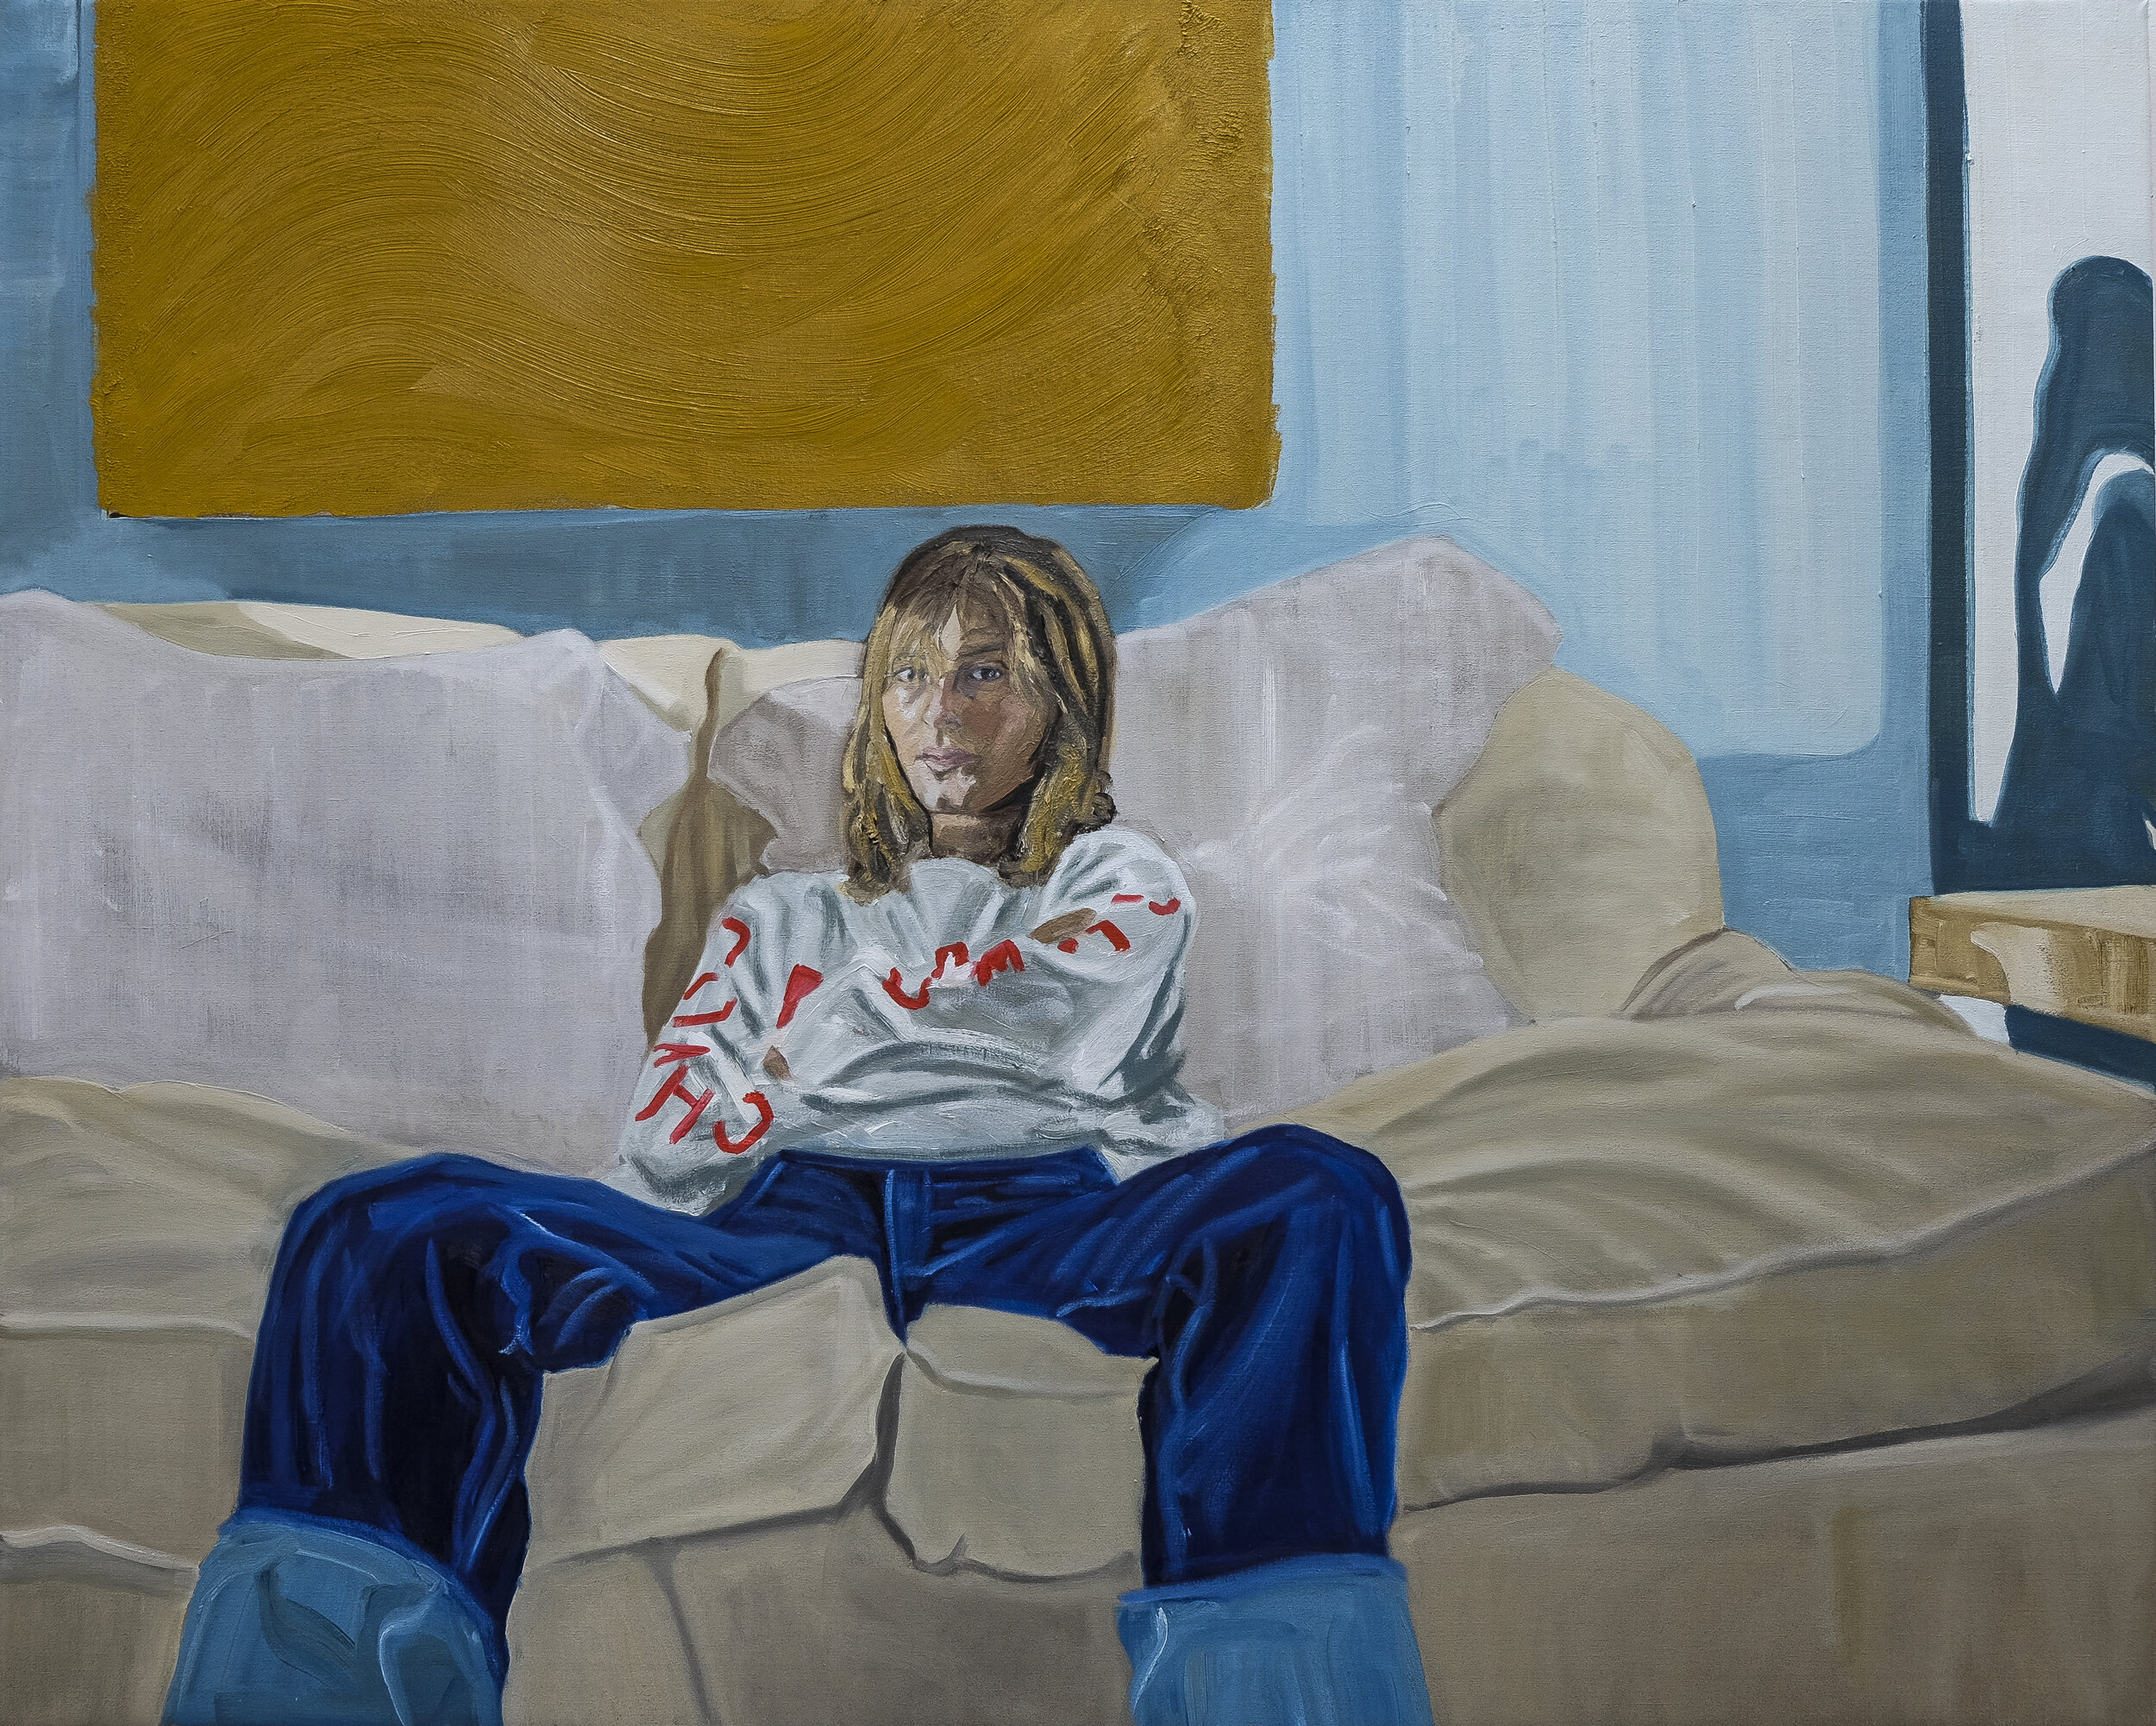   Olympia At Home   2020  Oil on linen  152cm x 122cm 